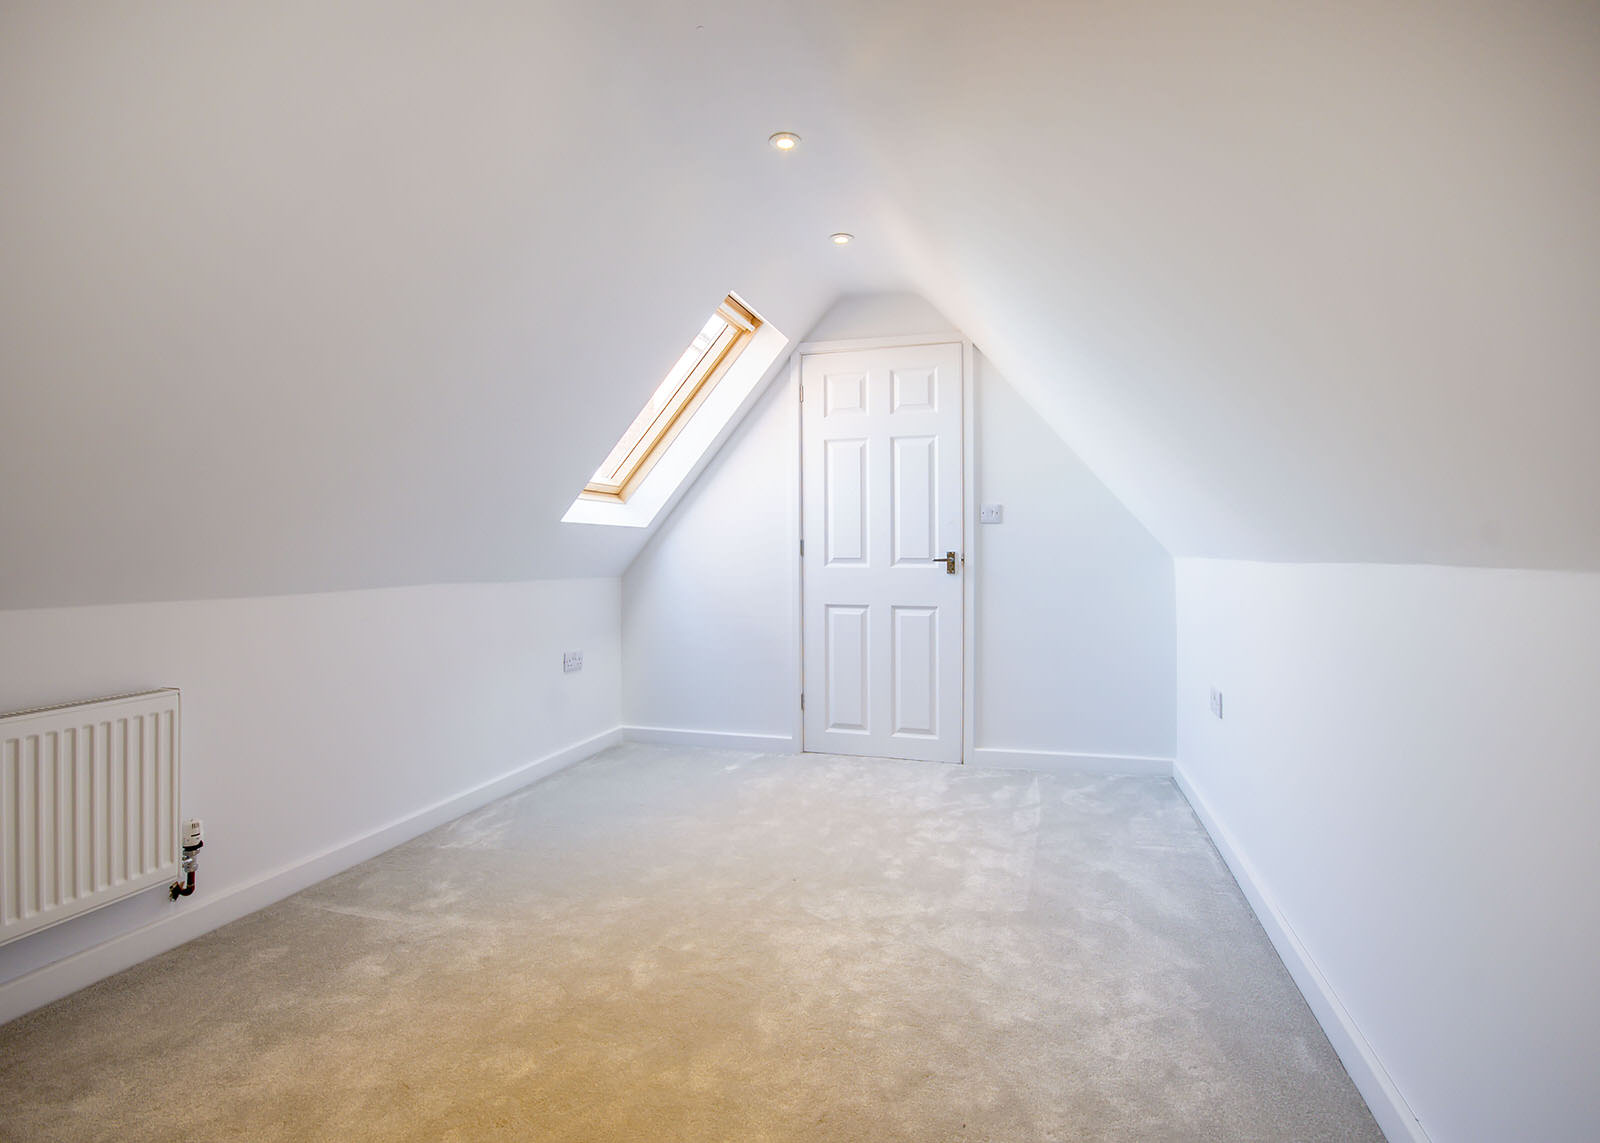 Loft Conversions What You Need To, Do I Need Planning Permission To Convert My Loft Into A Bedroom